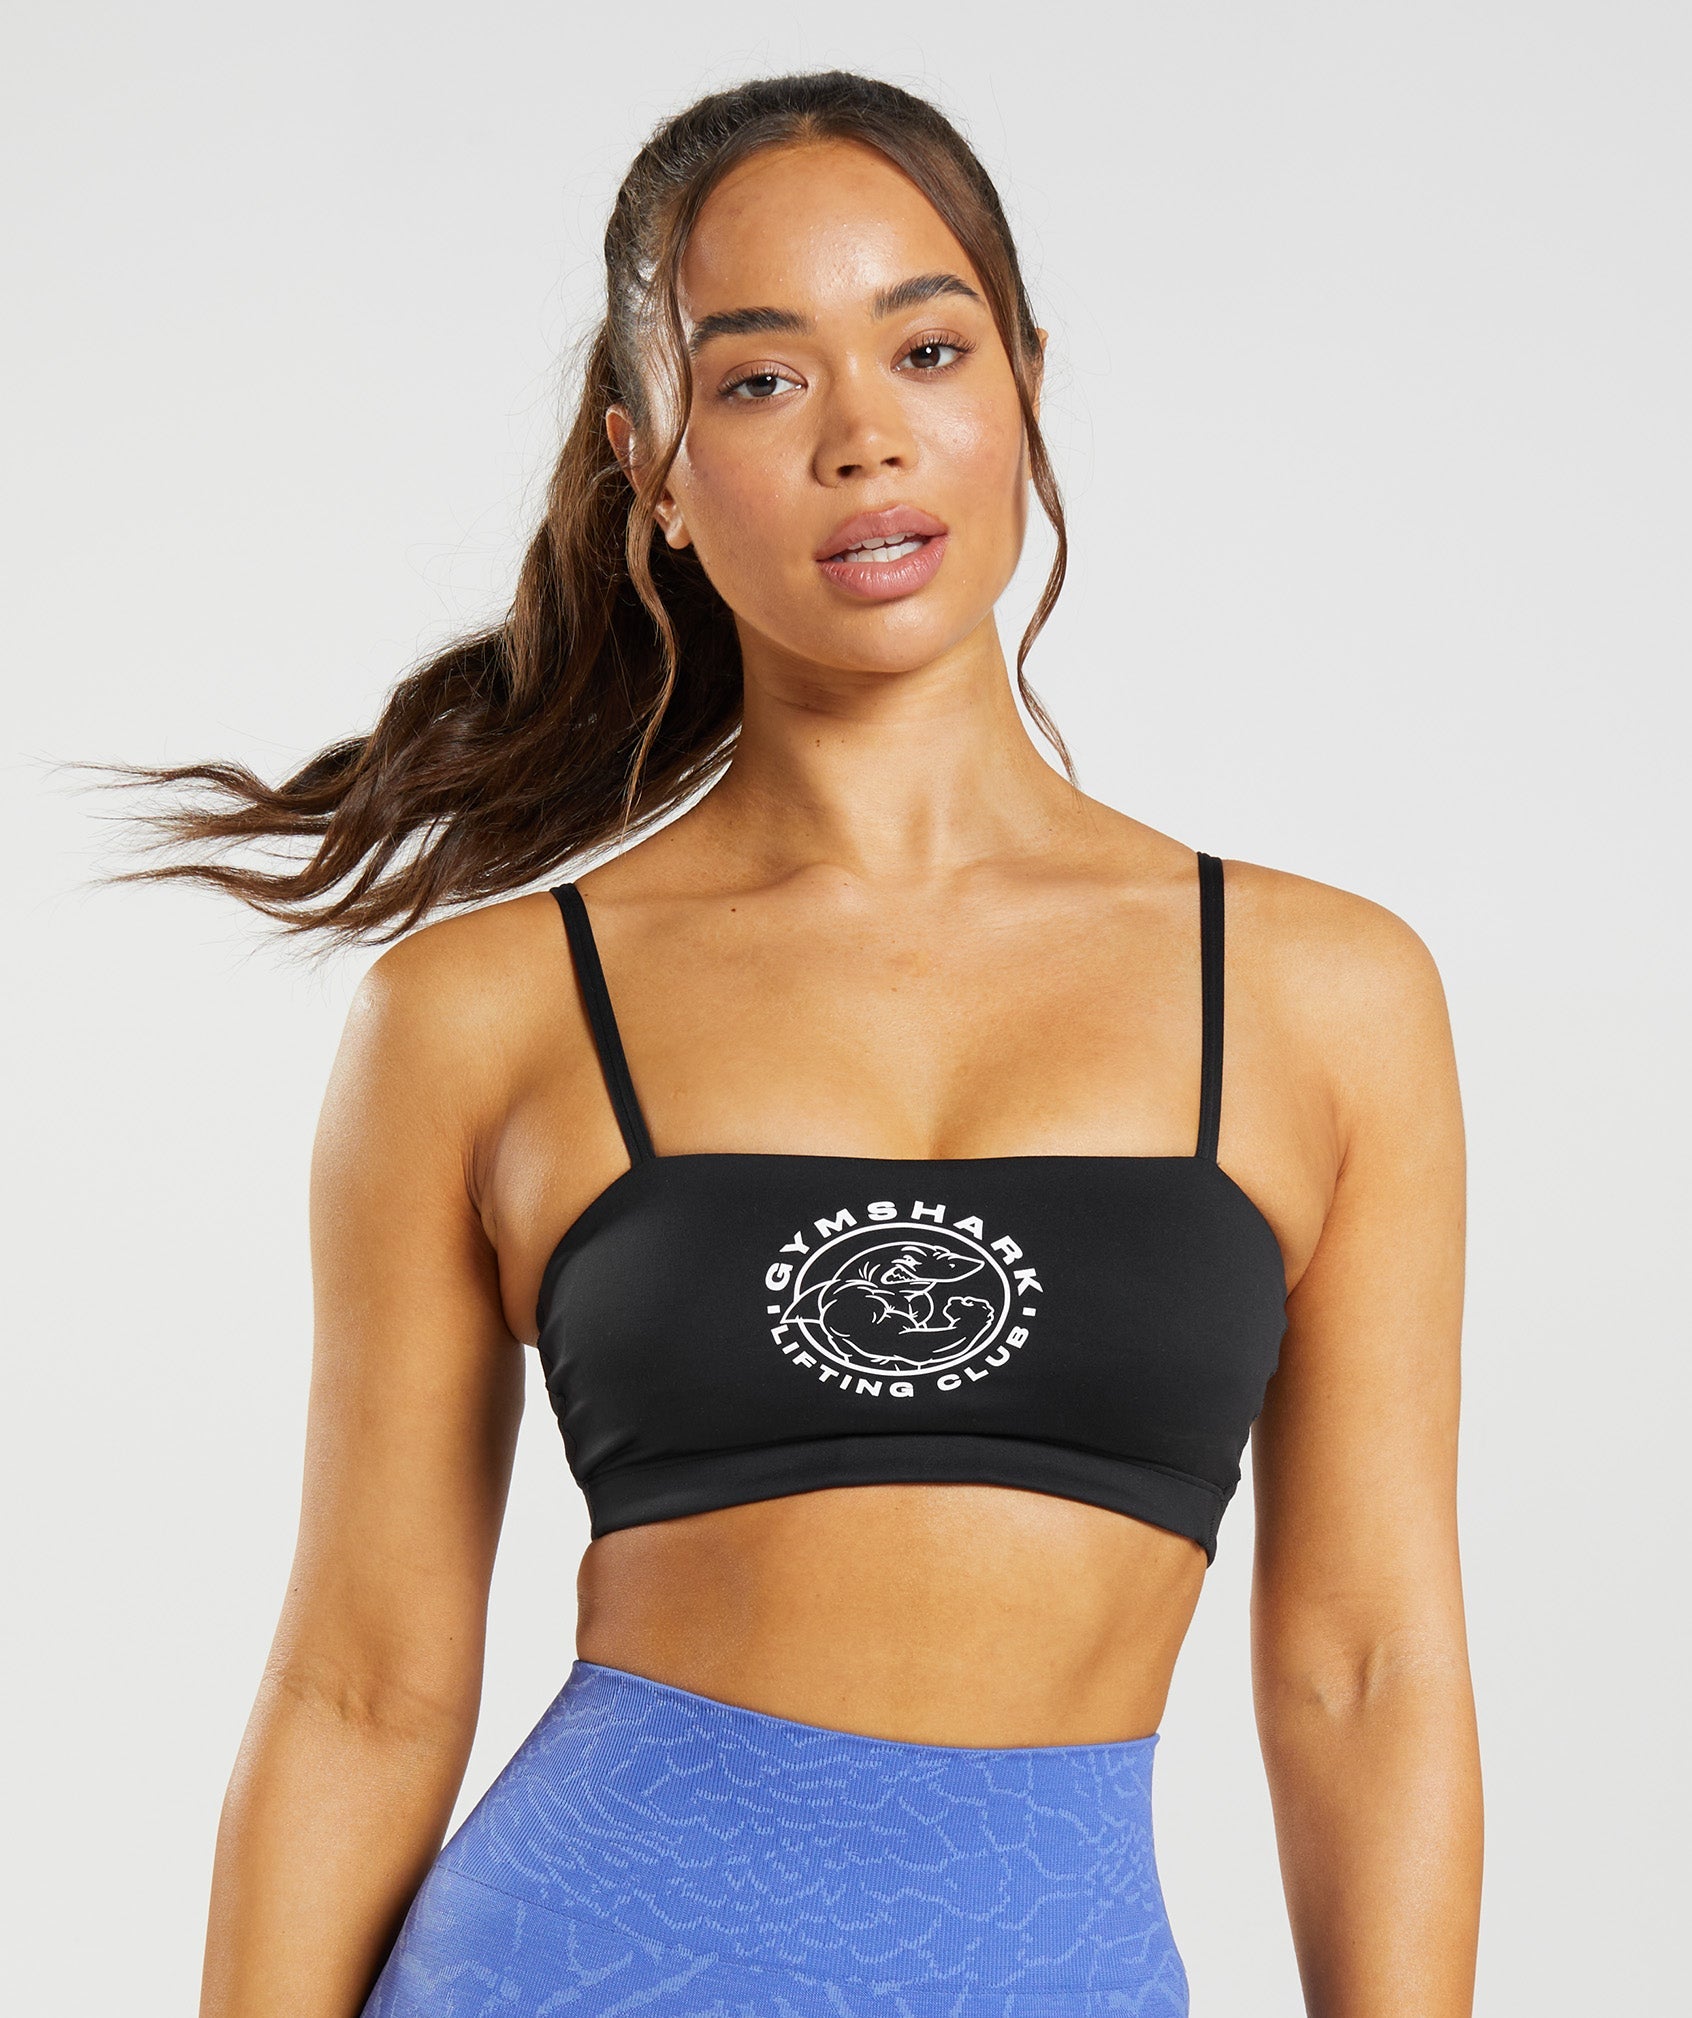 Gymshark New Sports Bra M Size M - $30 New With Tags - From Adrianna